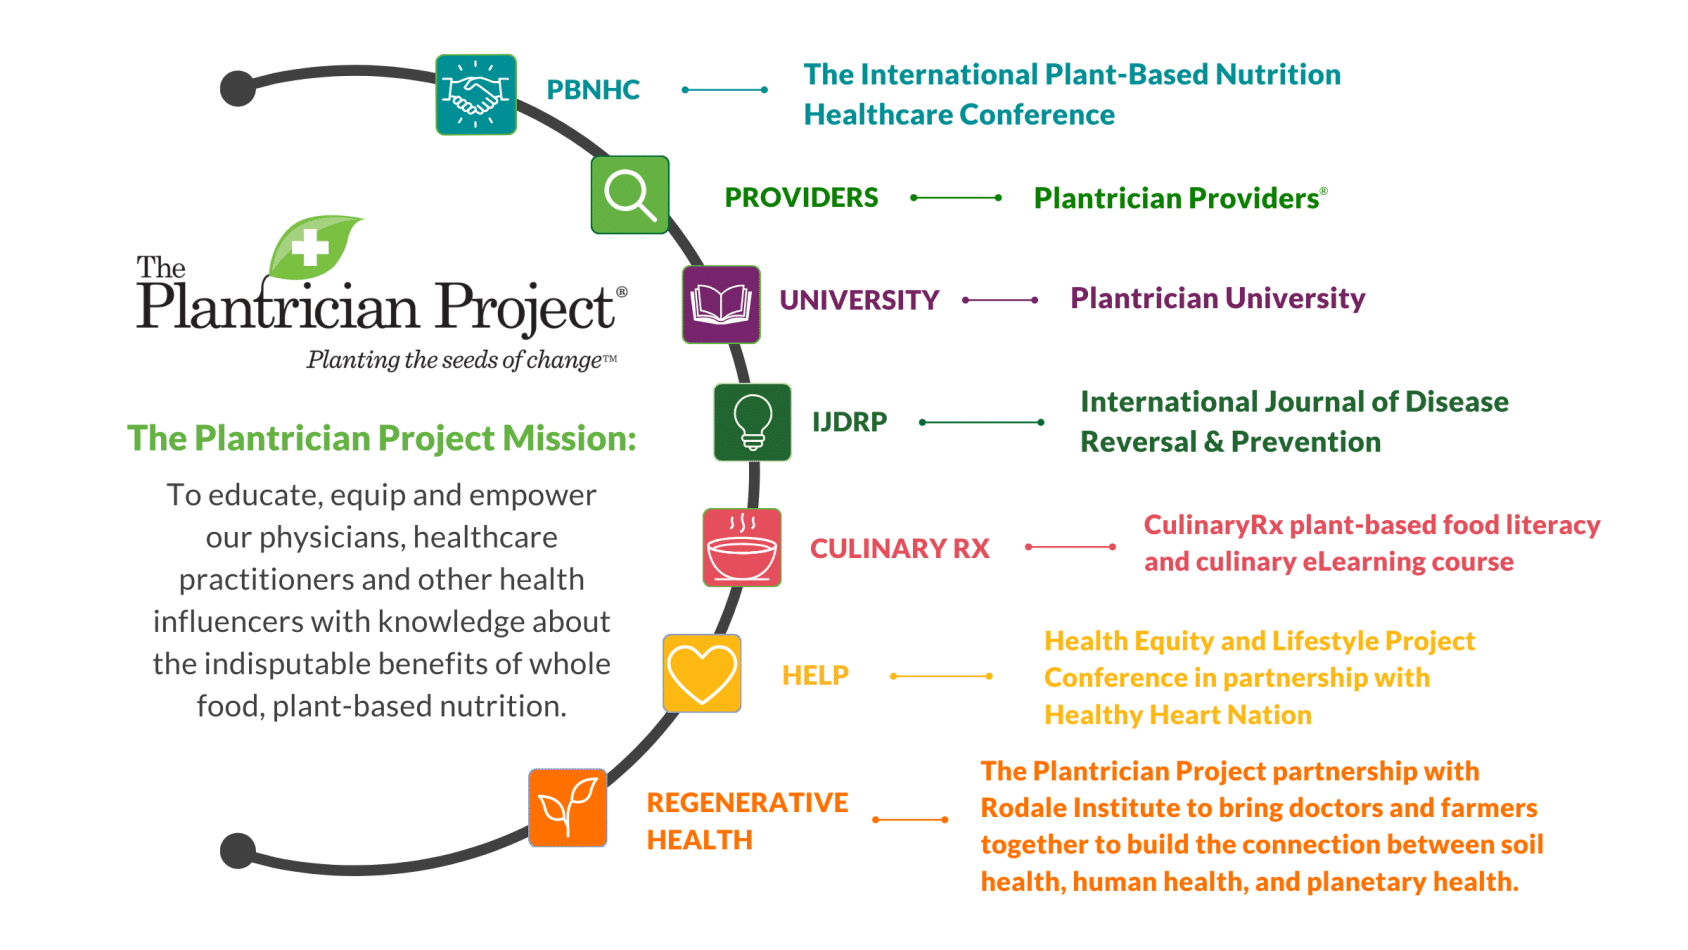 The Plantrician Project – Planting the seeds of change